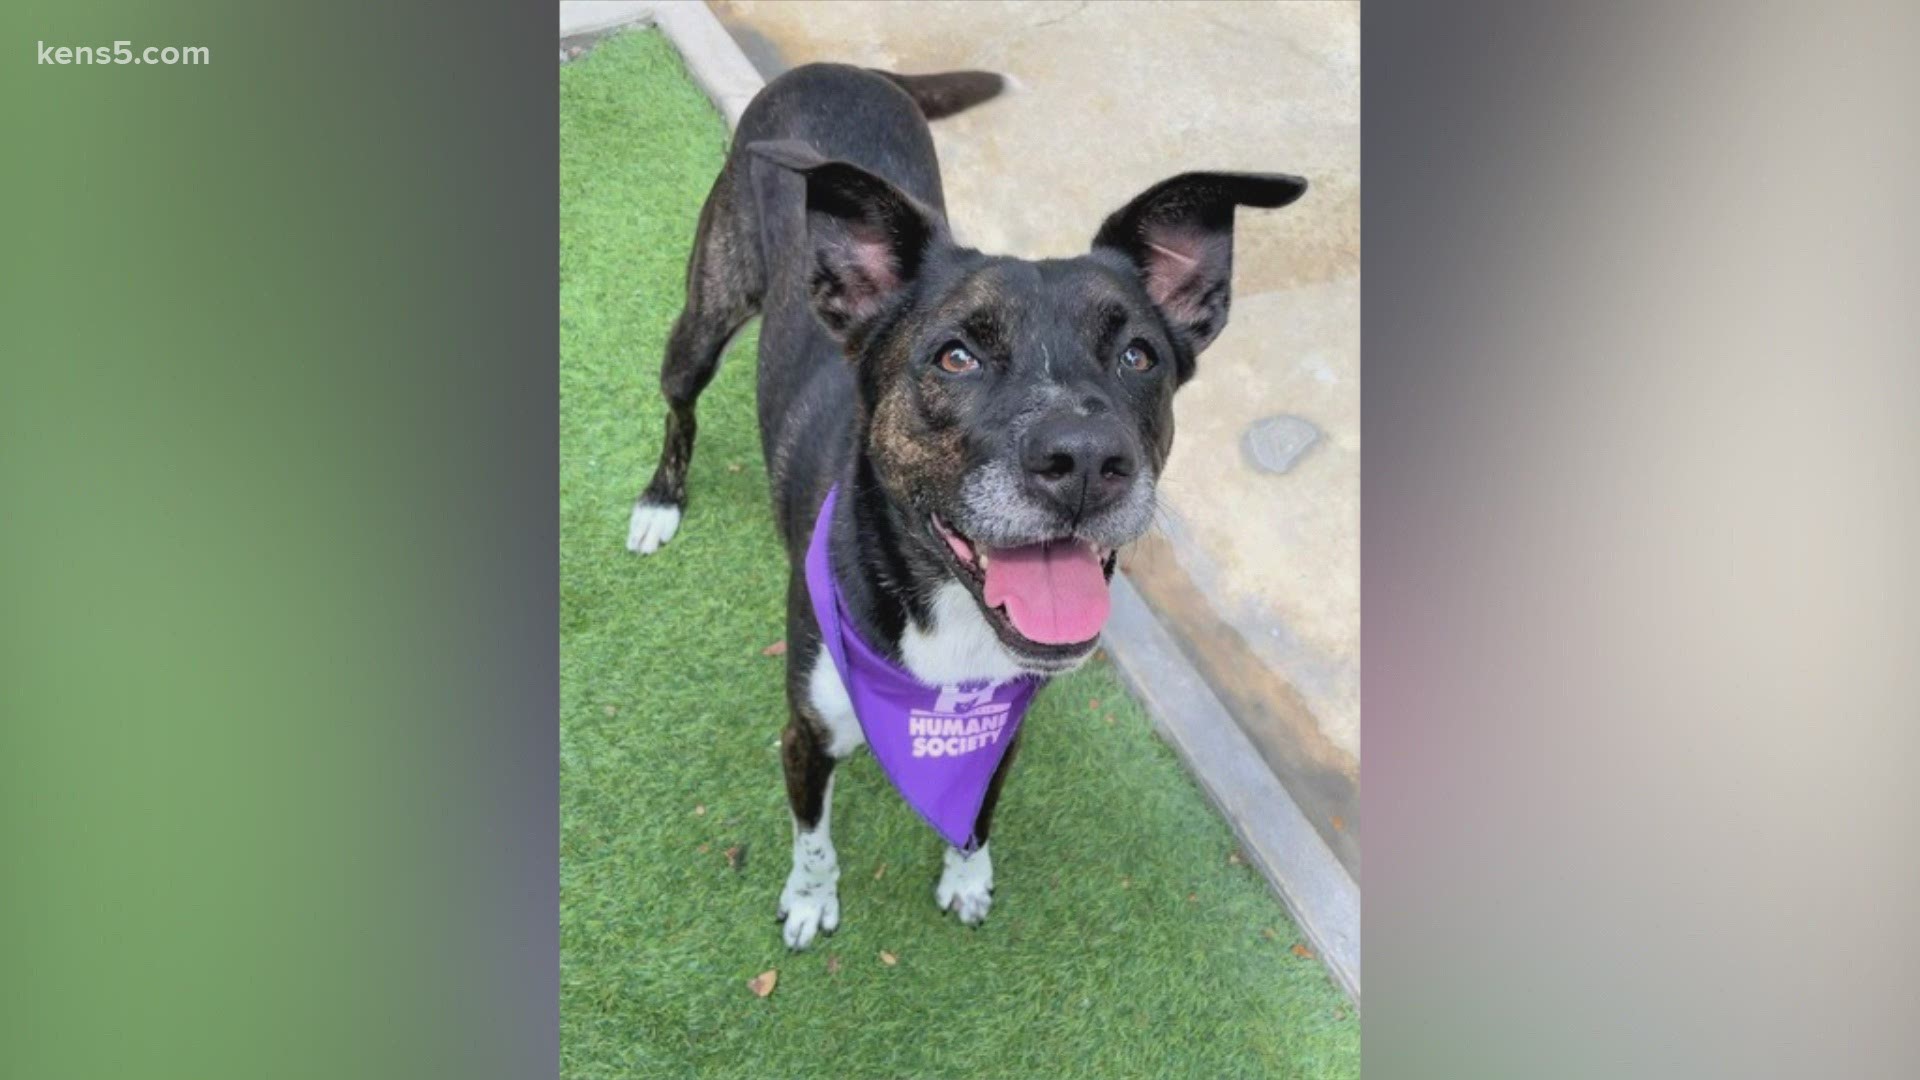 This 7-year-old dog loves kids and gets along with other dogs. She has a calm personality and needs a loving home. She's available at the San Antonio Humane Society.